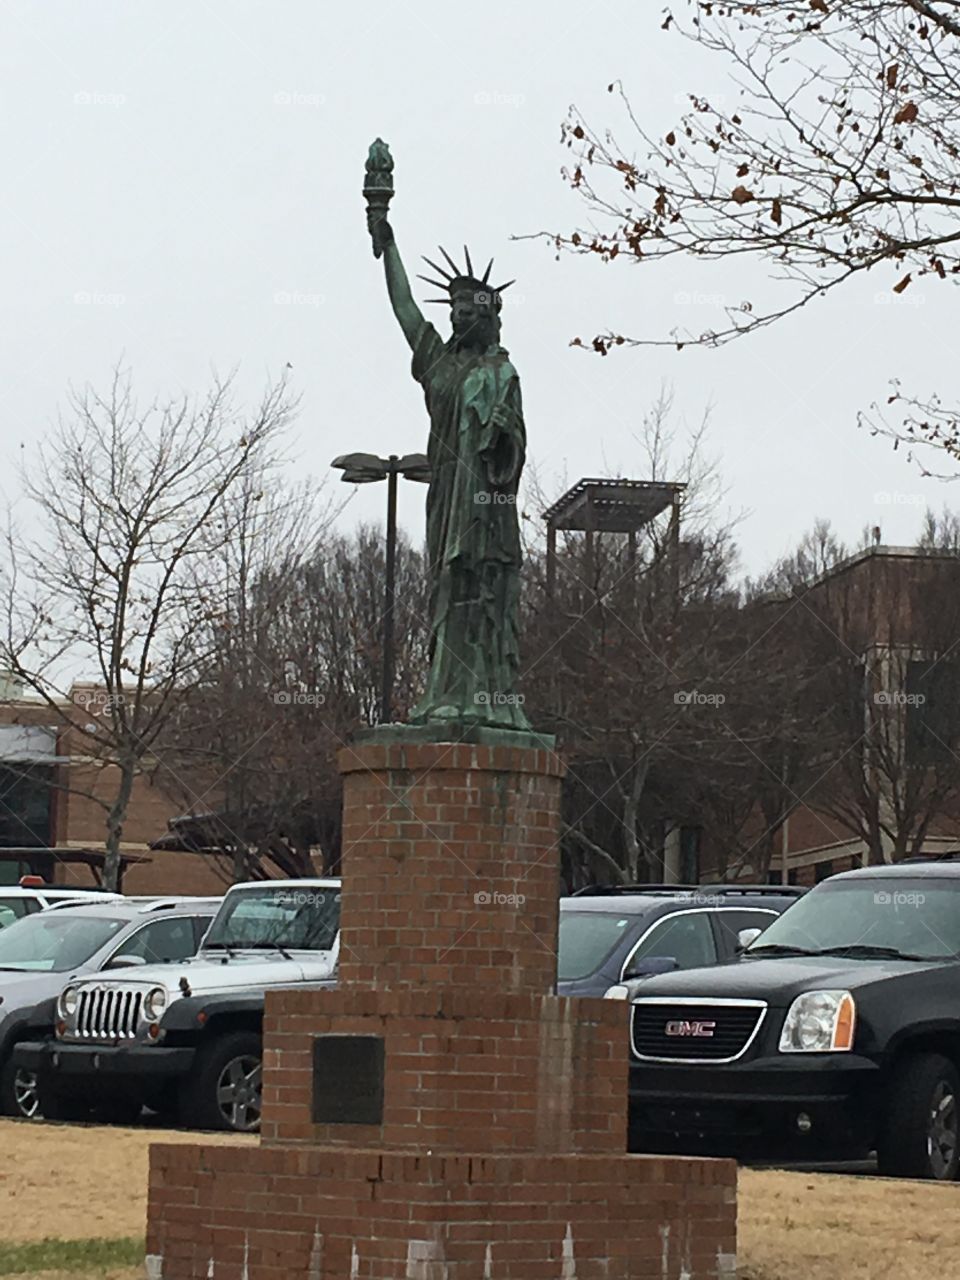 Statue of Liberty at a hospital in our area while visiting a friend. The statue is outside in the parking lot on the visitors side.